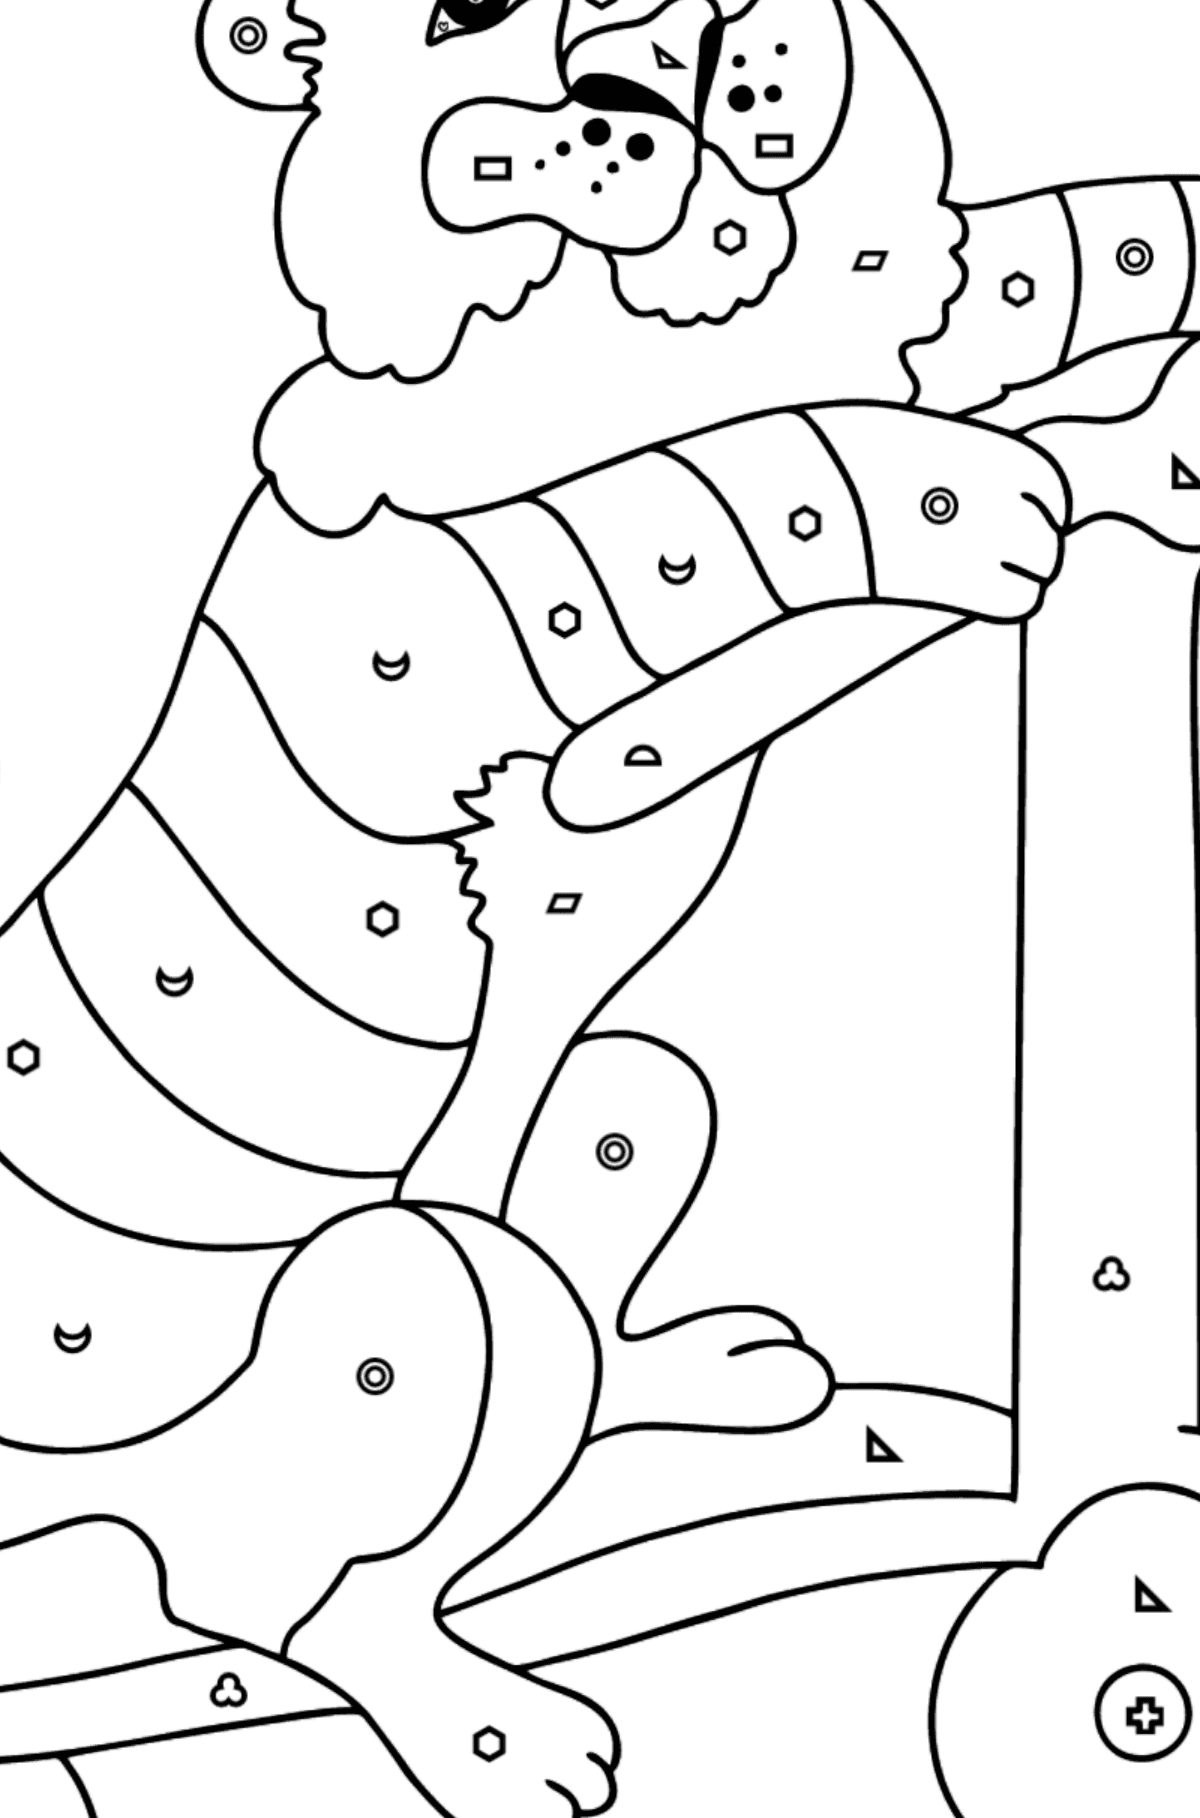 Coloring Page - A Tiger on a Fancy Scooter - Coloring by Geometric Shapes for Kids